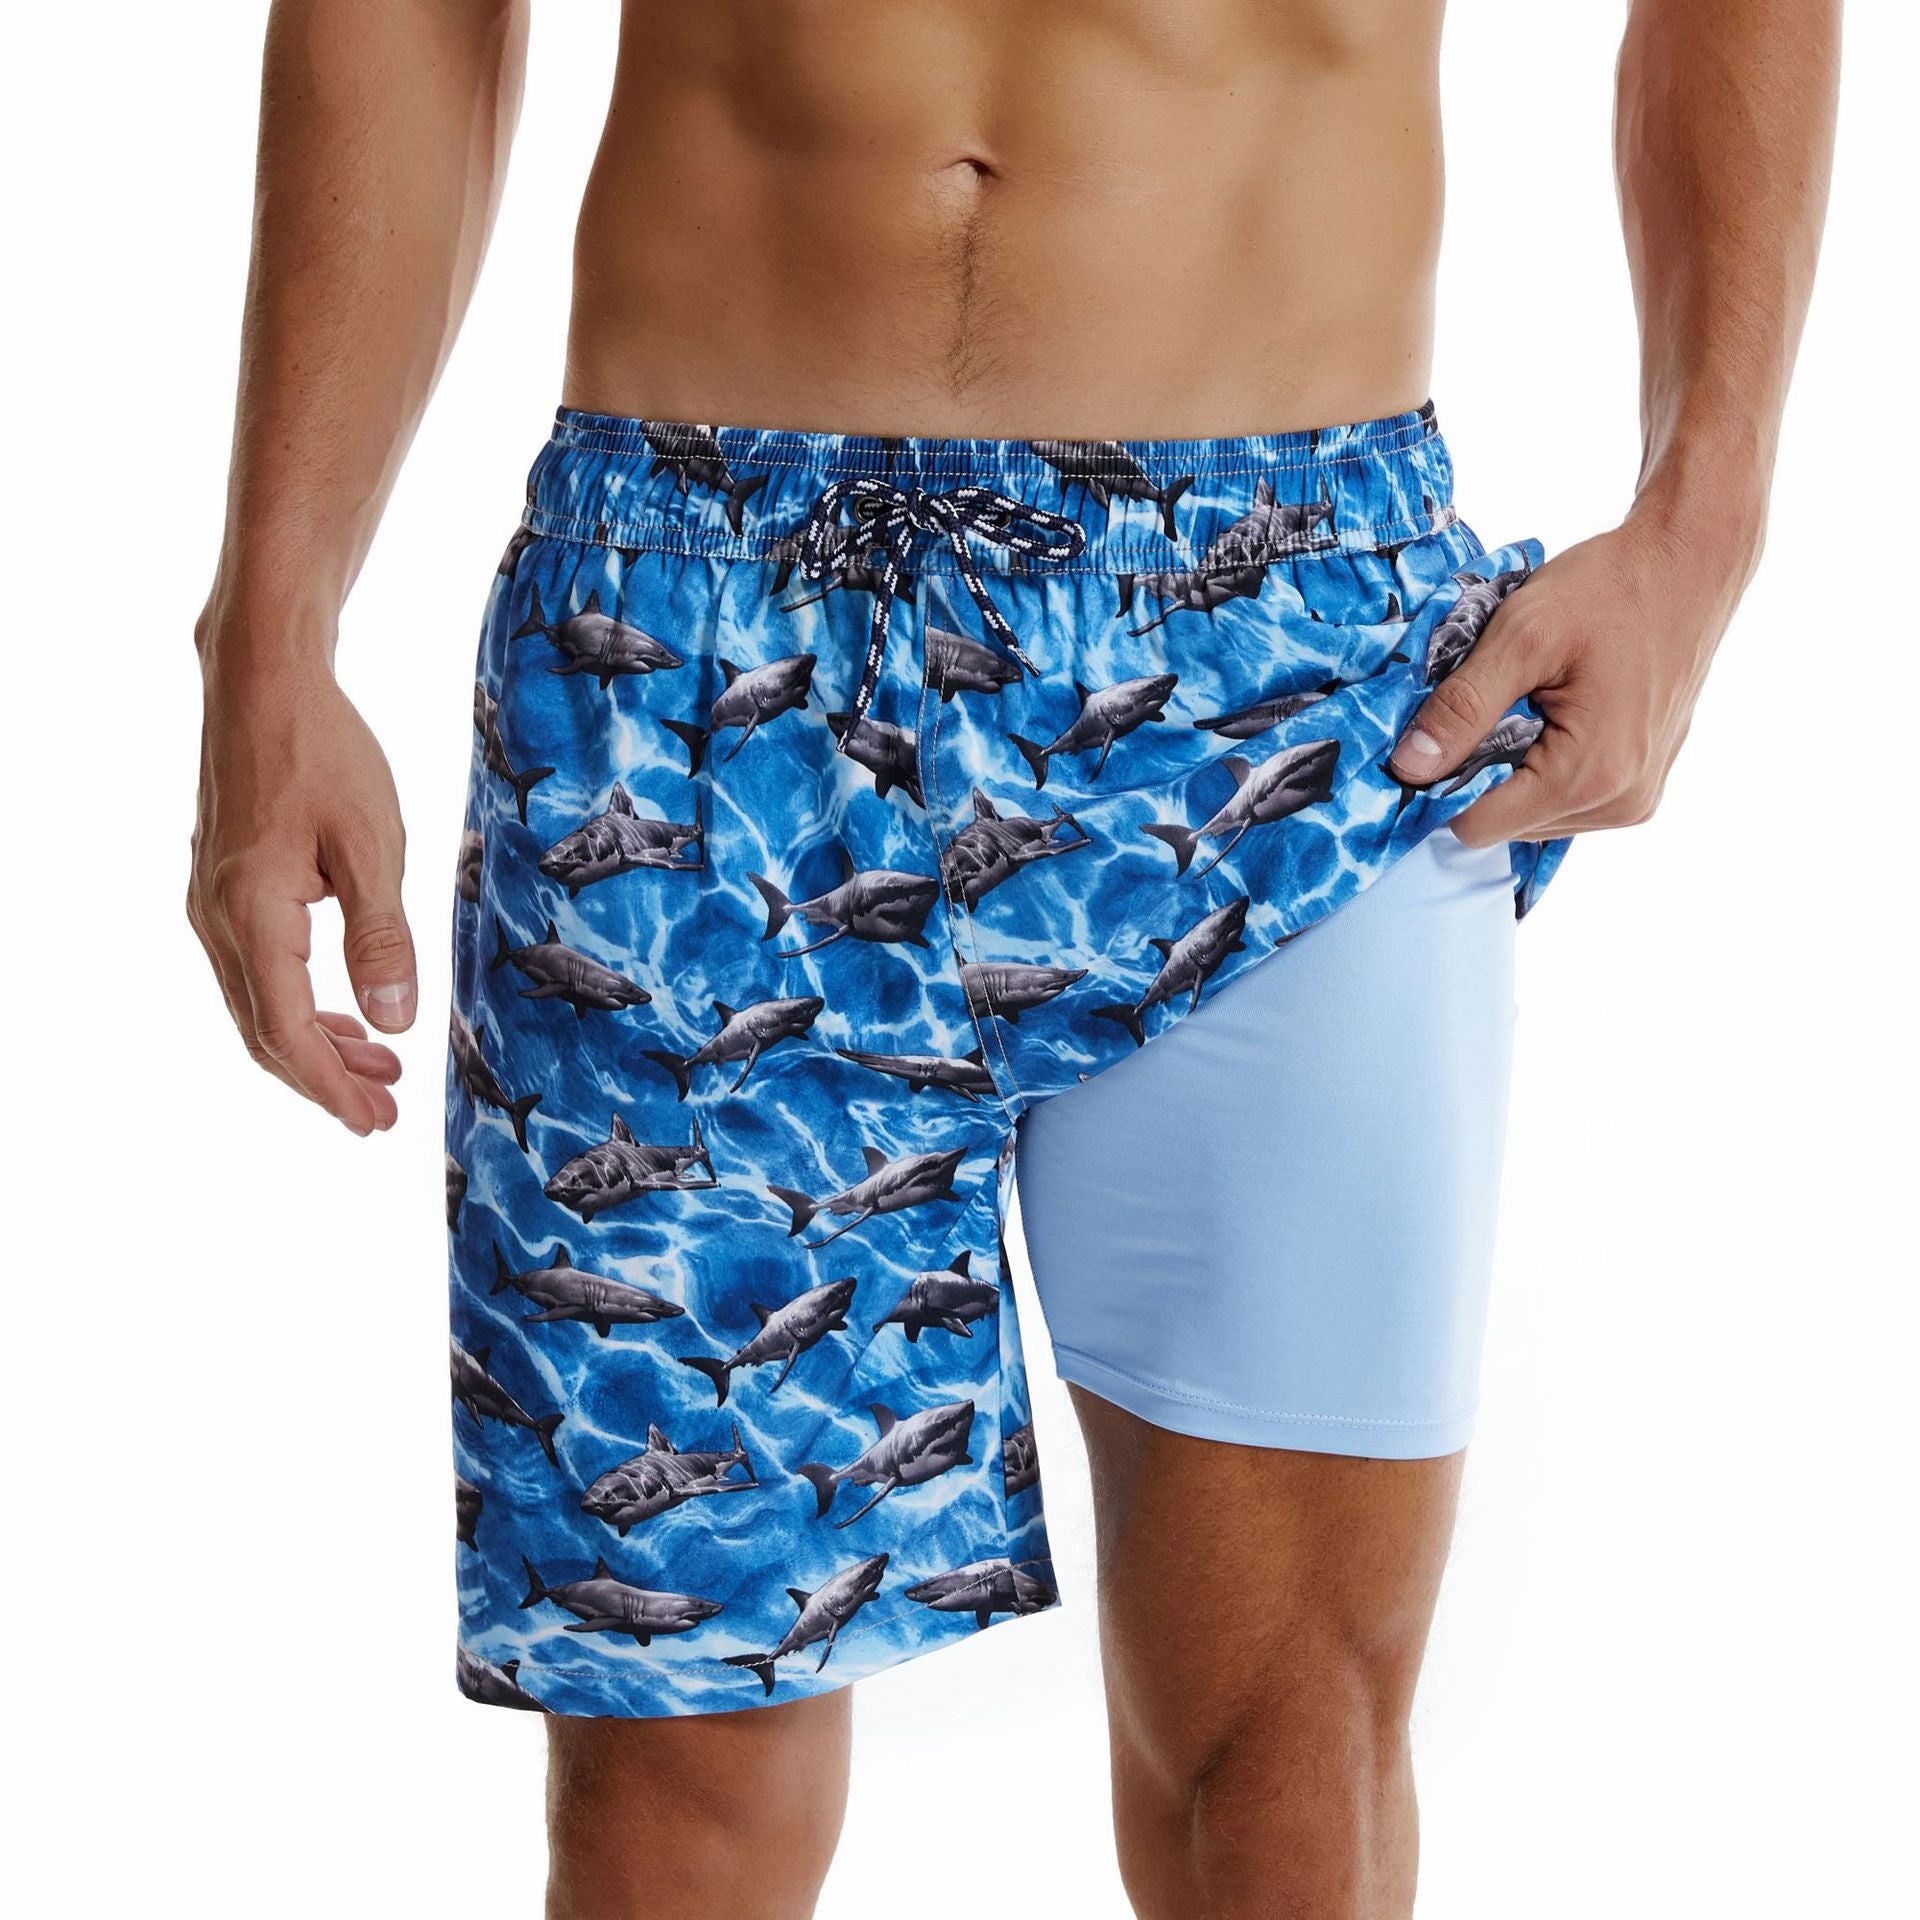 Men's Swim Trunks with Compression Liner Quick Dry 7" Inseam Swimsuit Swimwear - Sharks